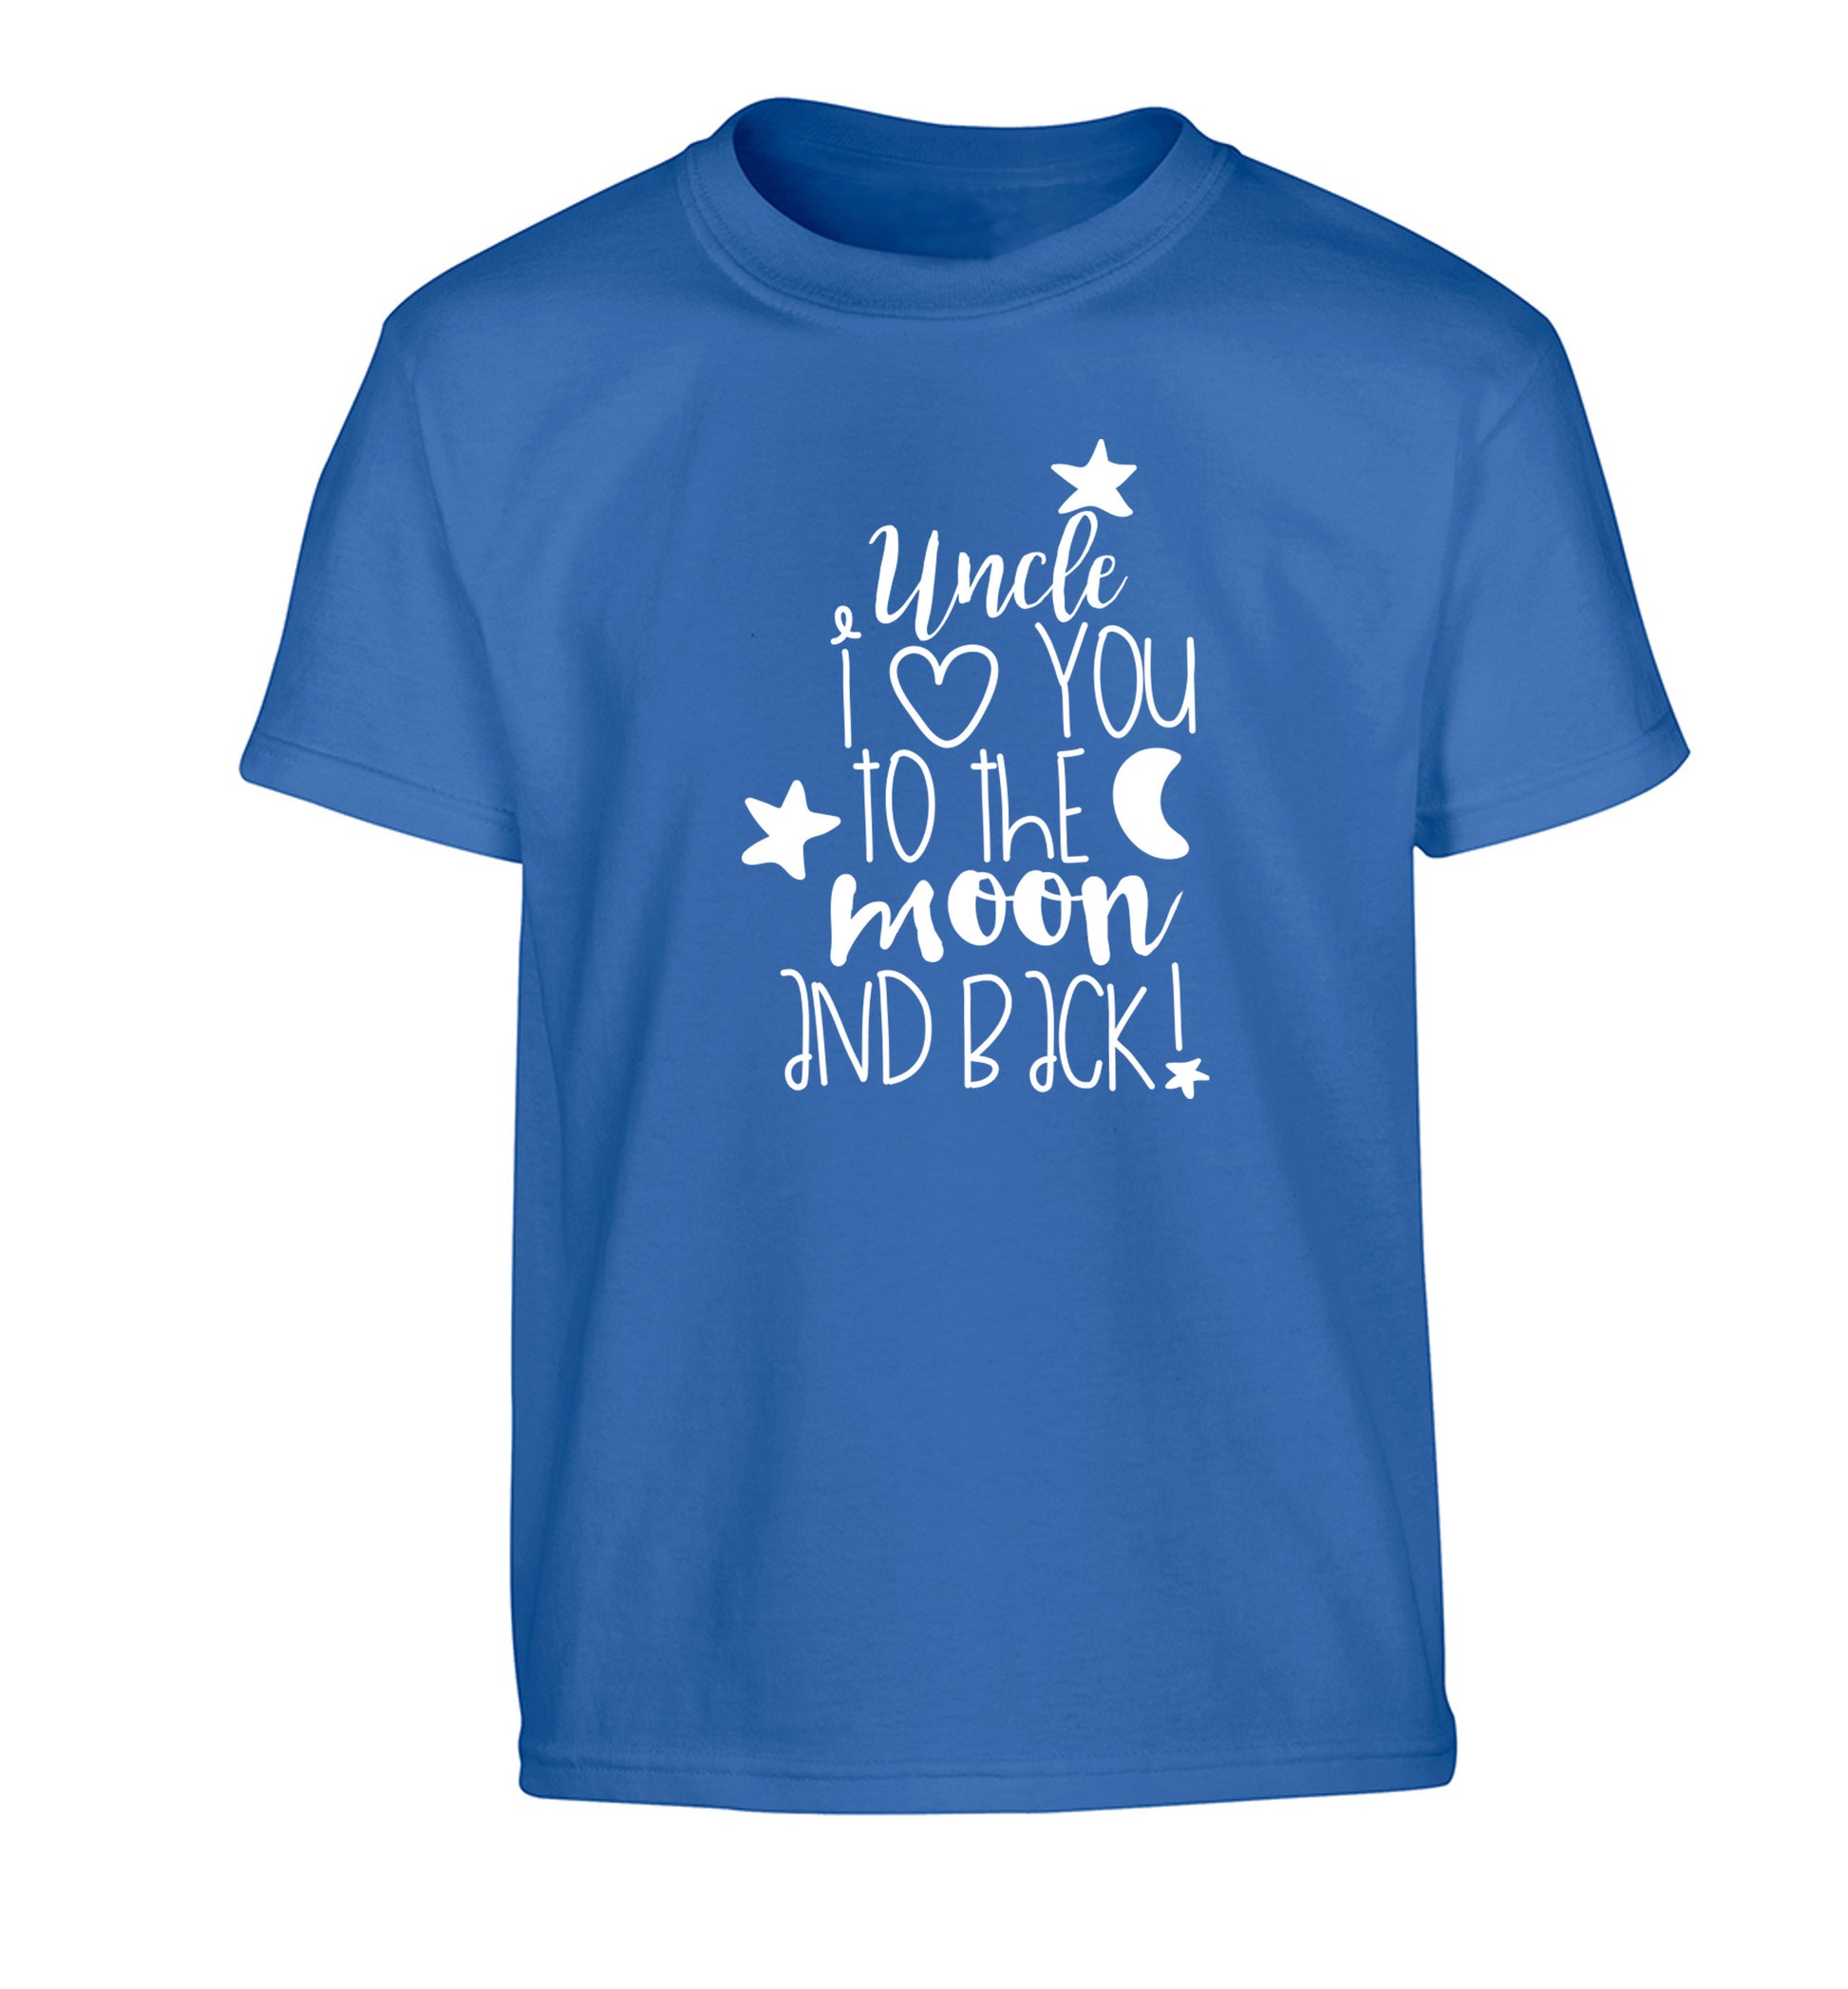 Uncle I love you to the moon and back Children's blue Tshirt 12-14 Years